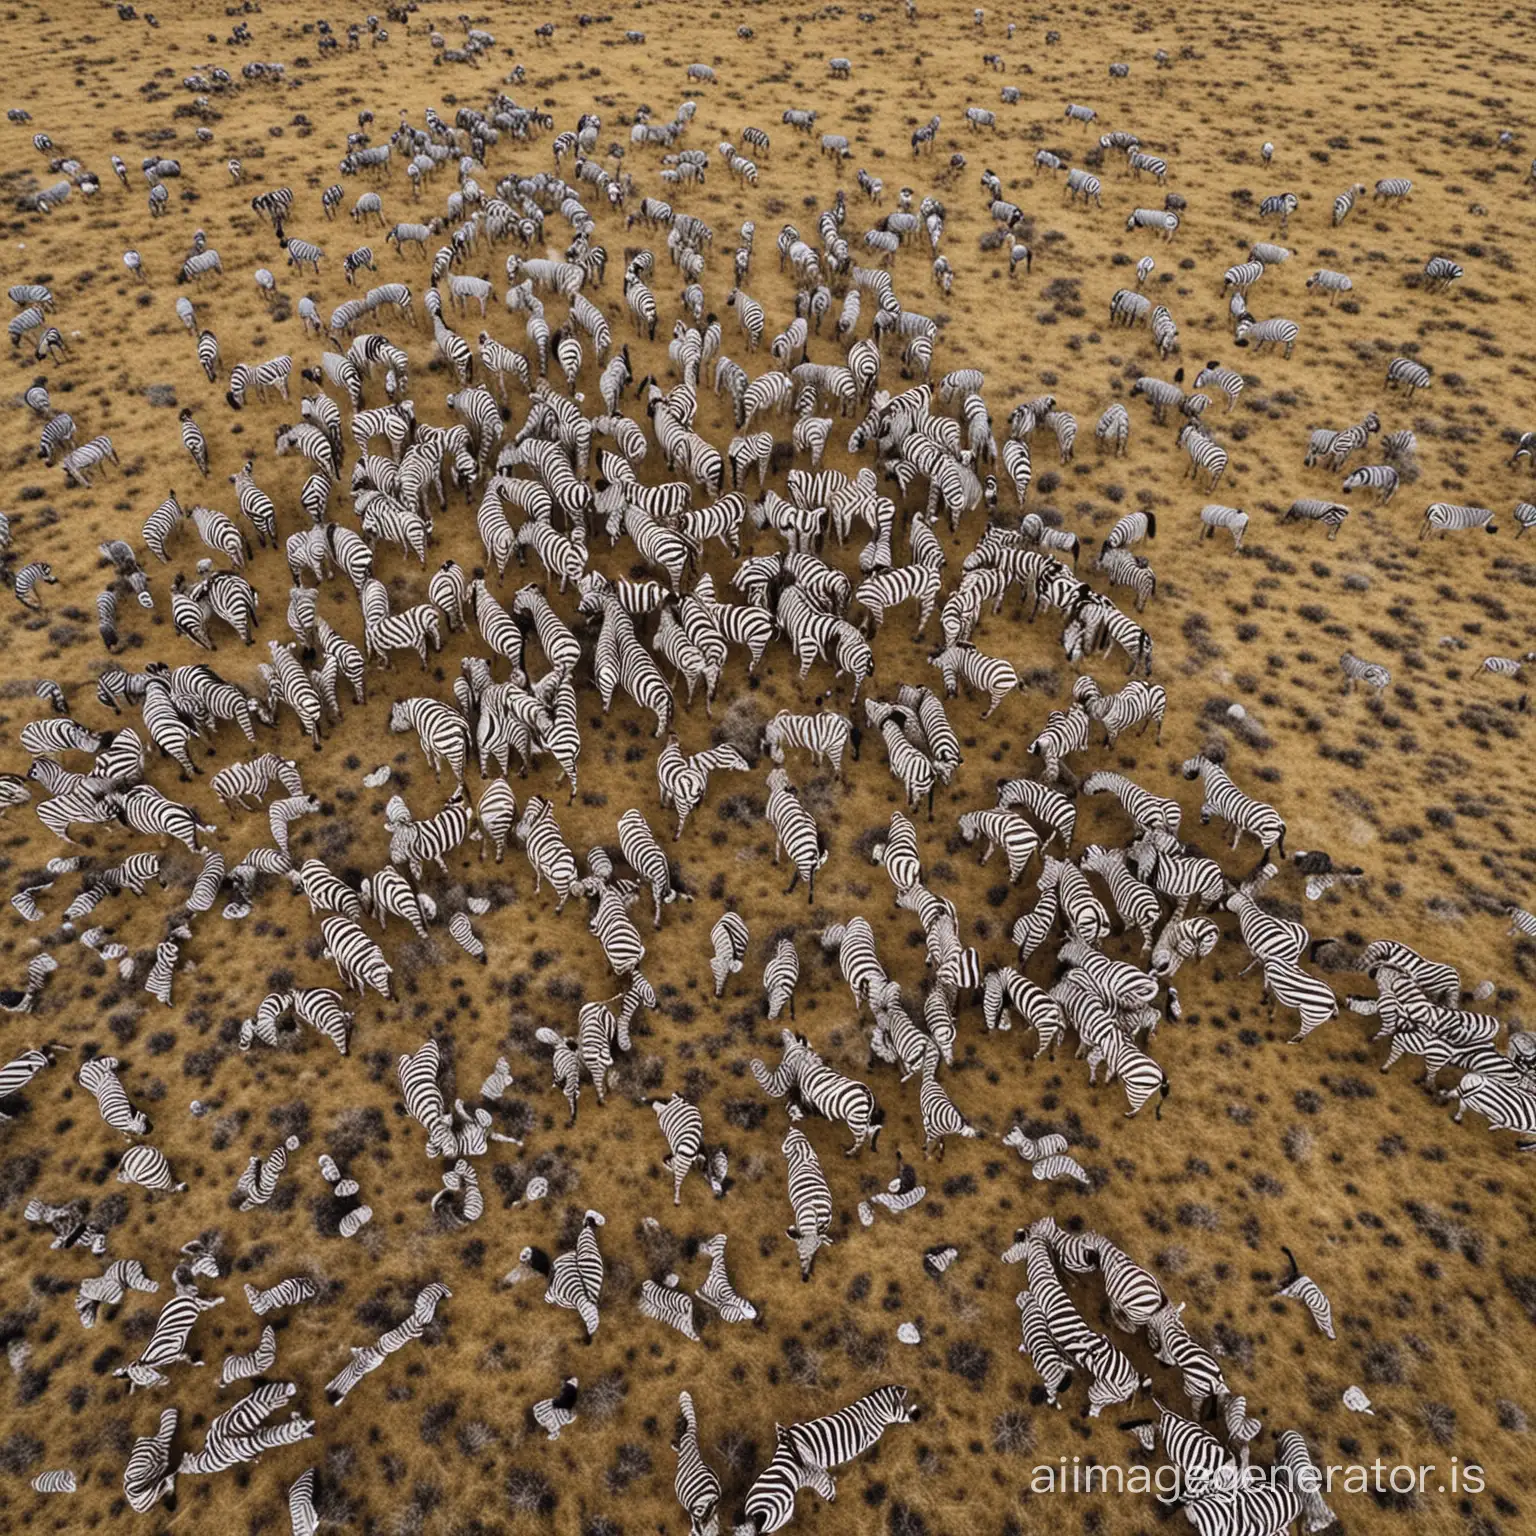 a photo taken from a drone of a herd of zebras in the savanna